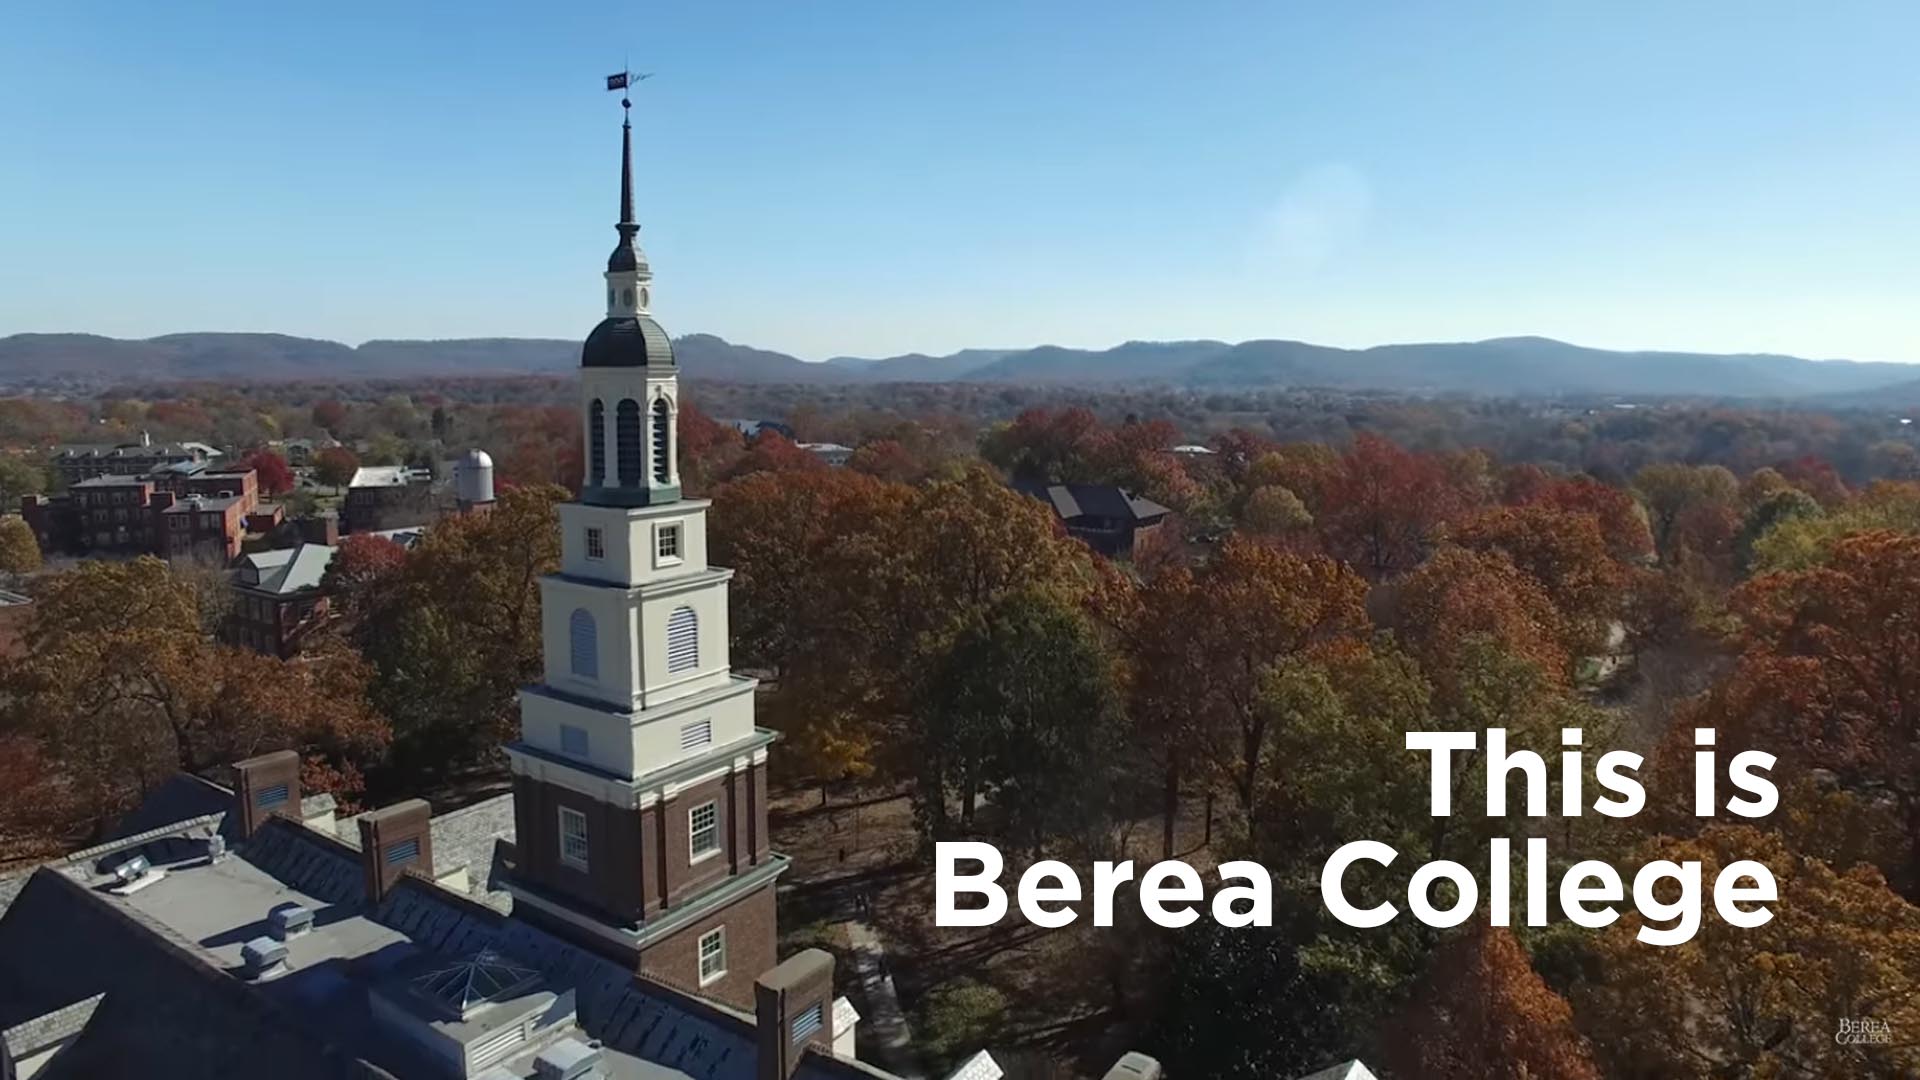 This is Berea College